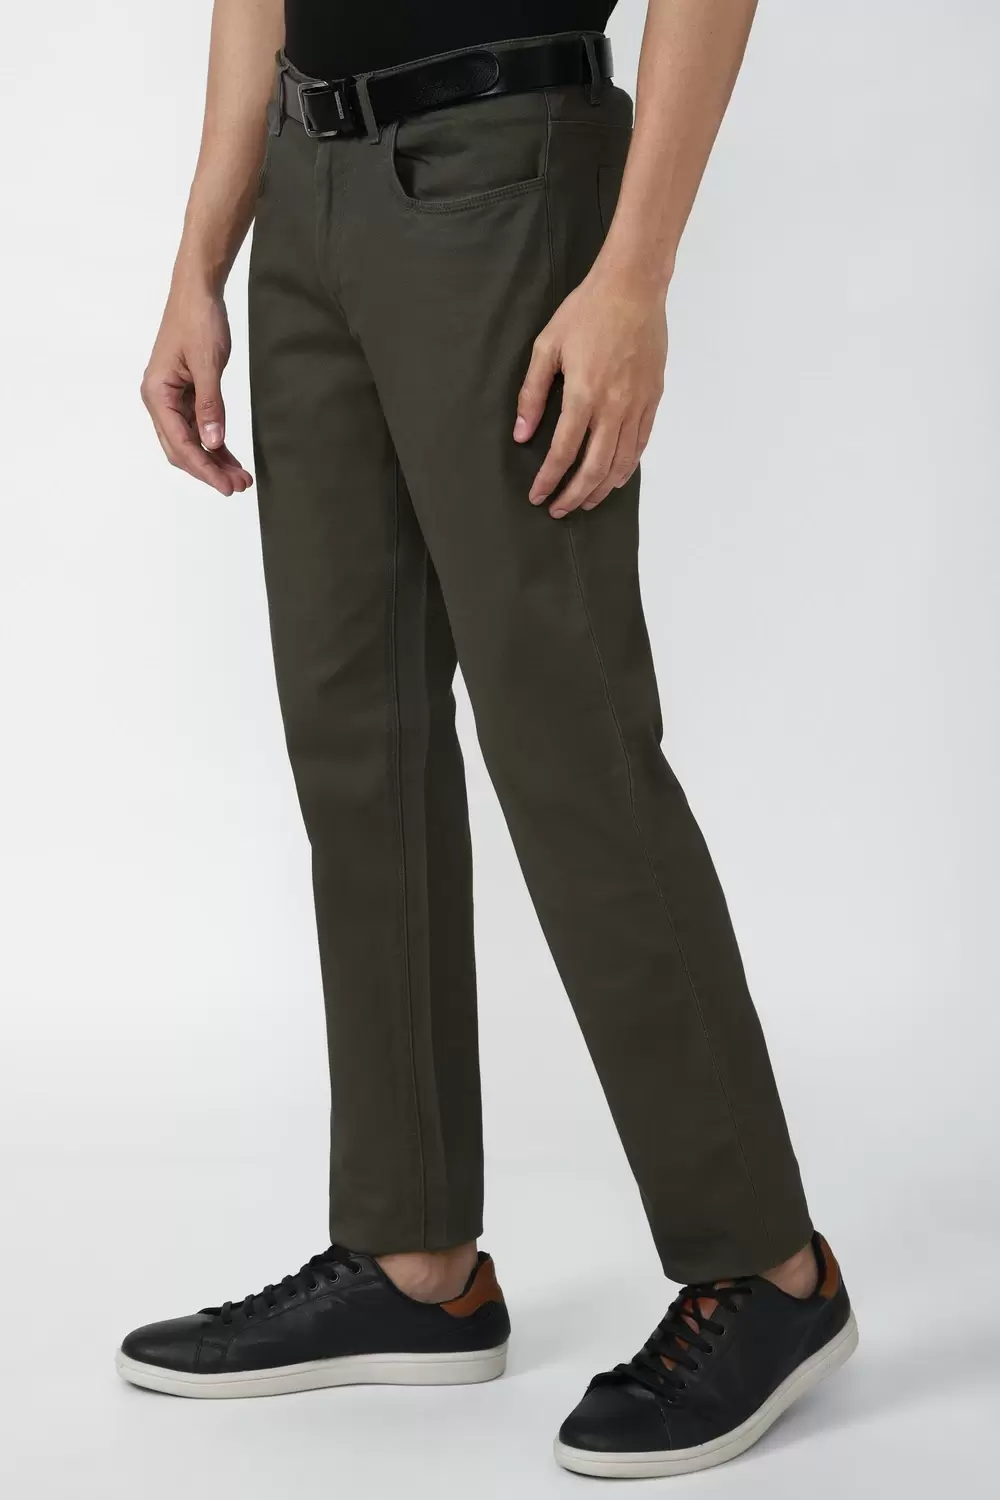 32 , 34 Peter England Khaki Trousers at Rs 900/piece in Mysore | ID:  18271493930